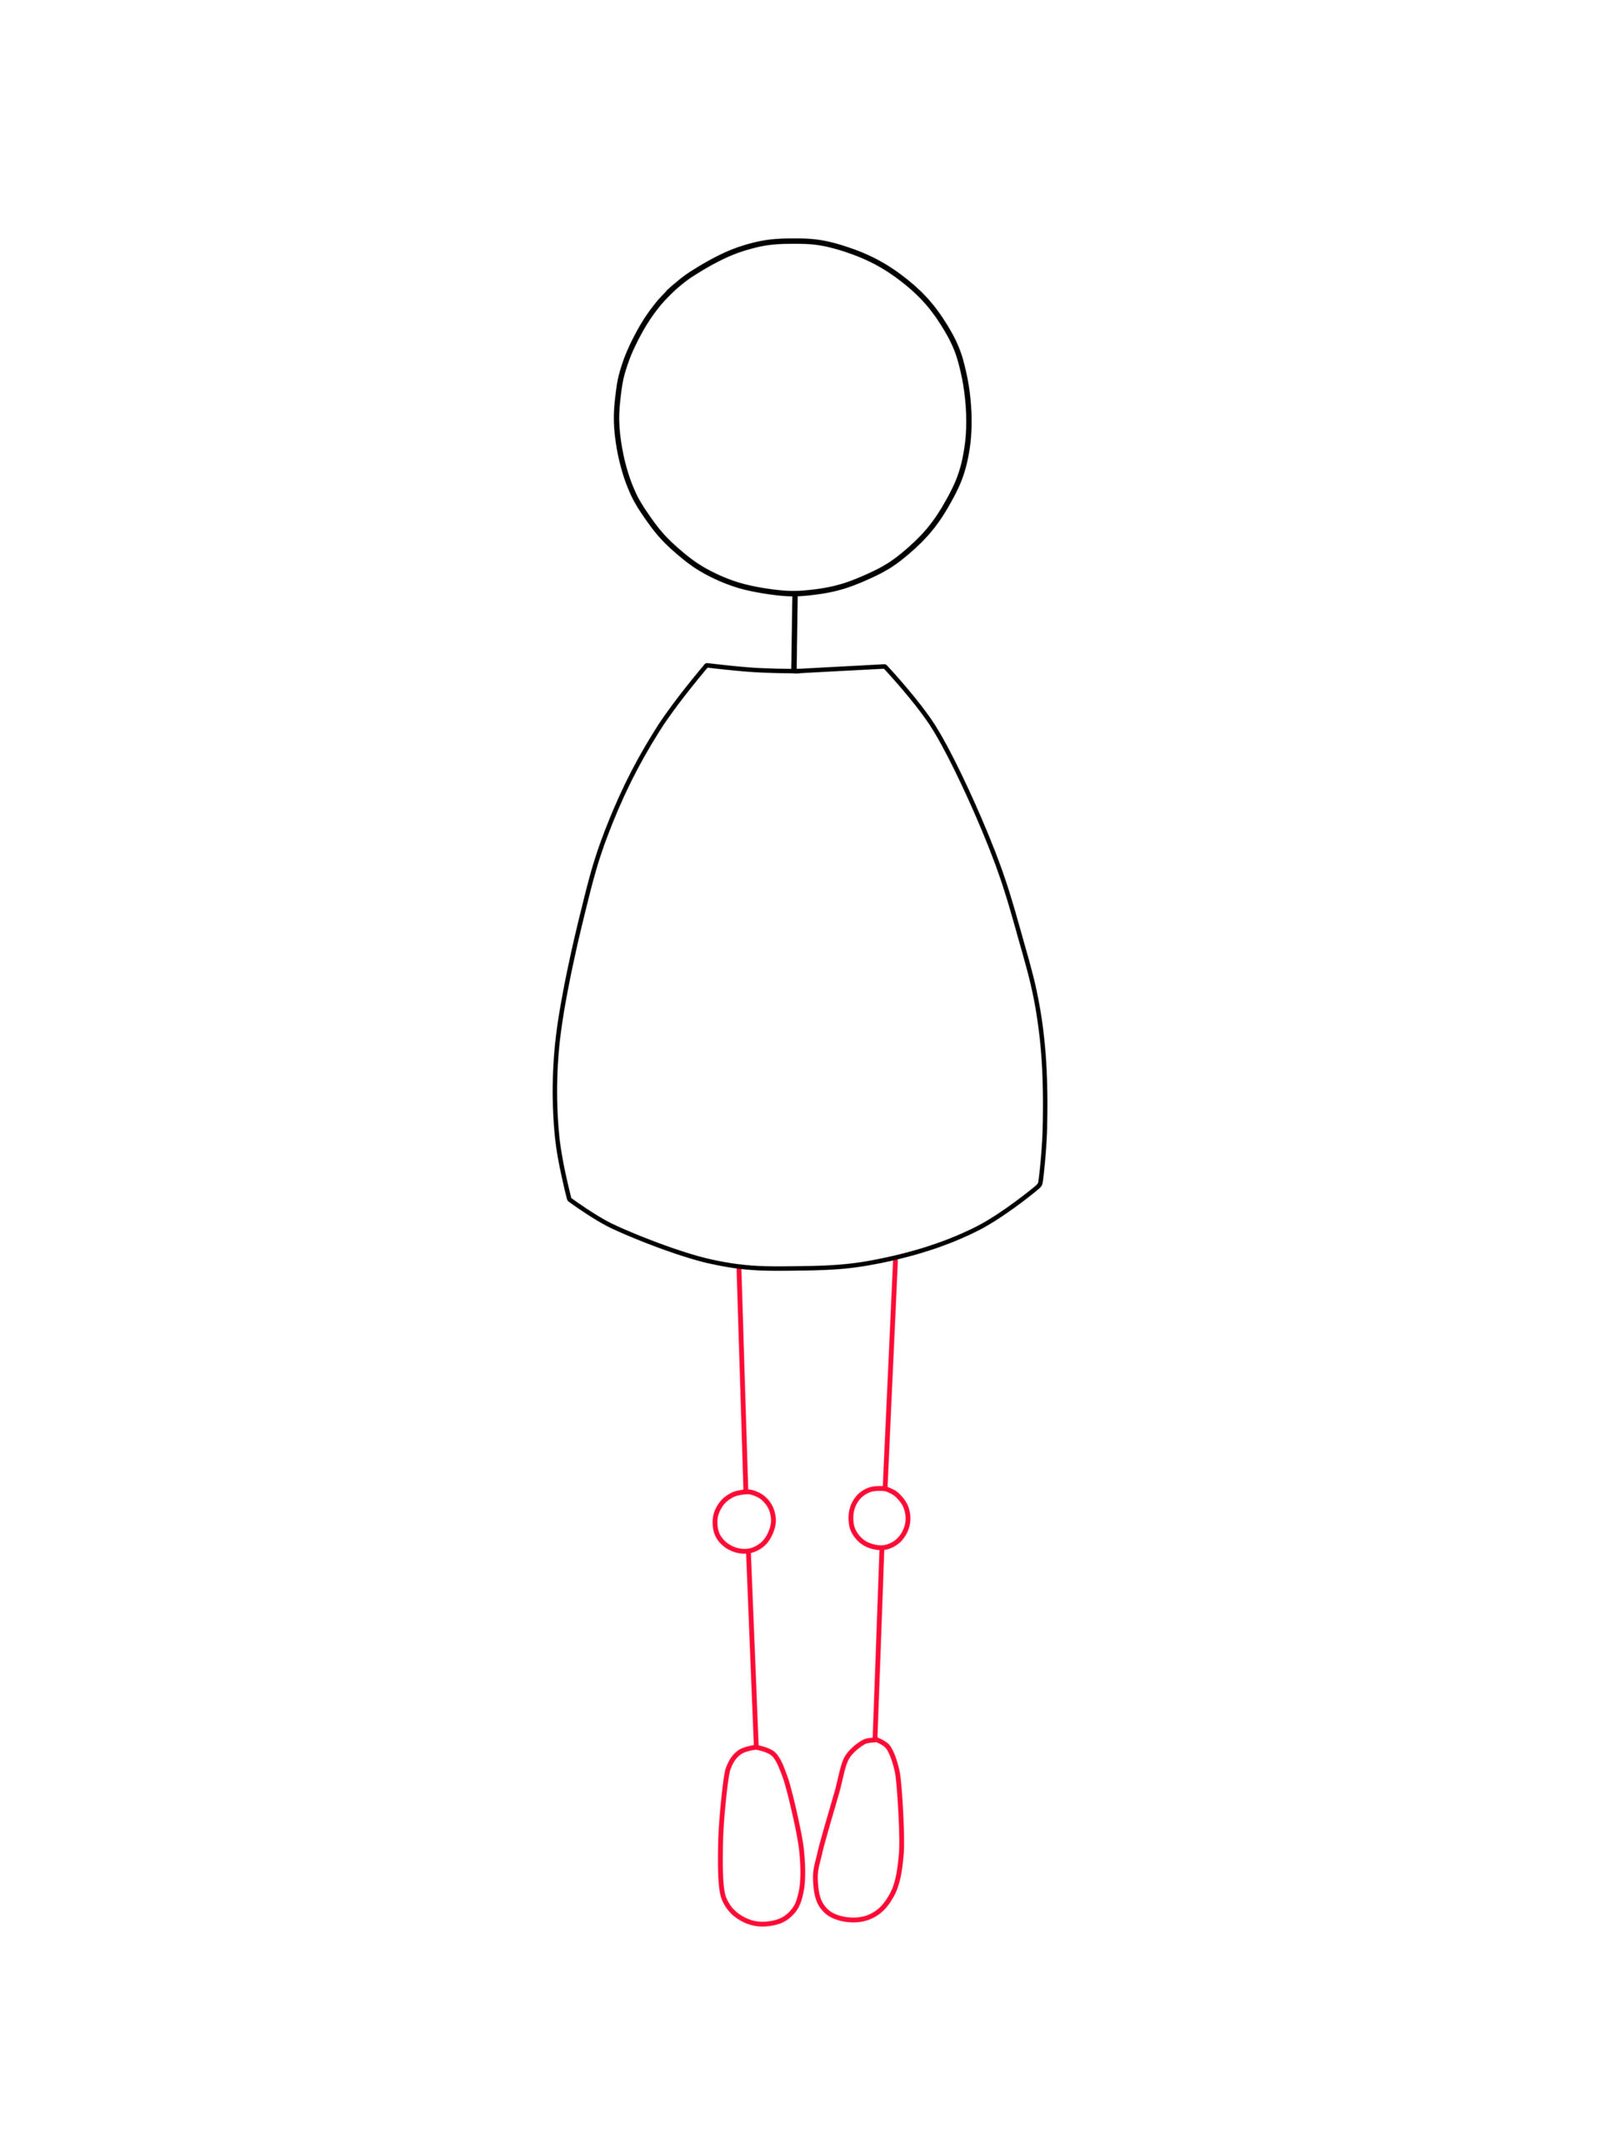 Draw outlines for the legs